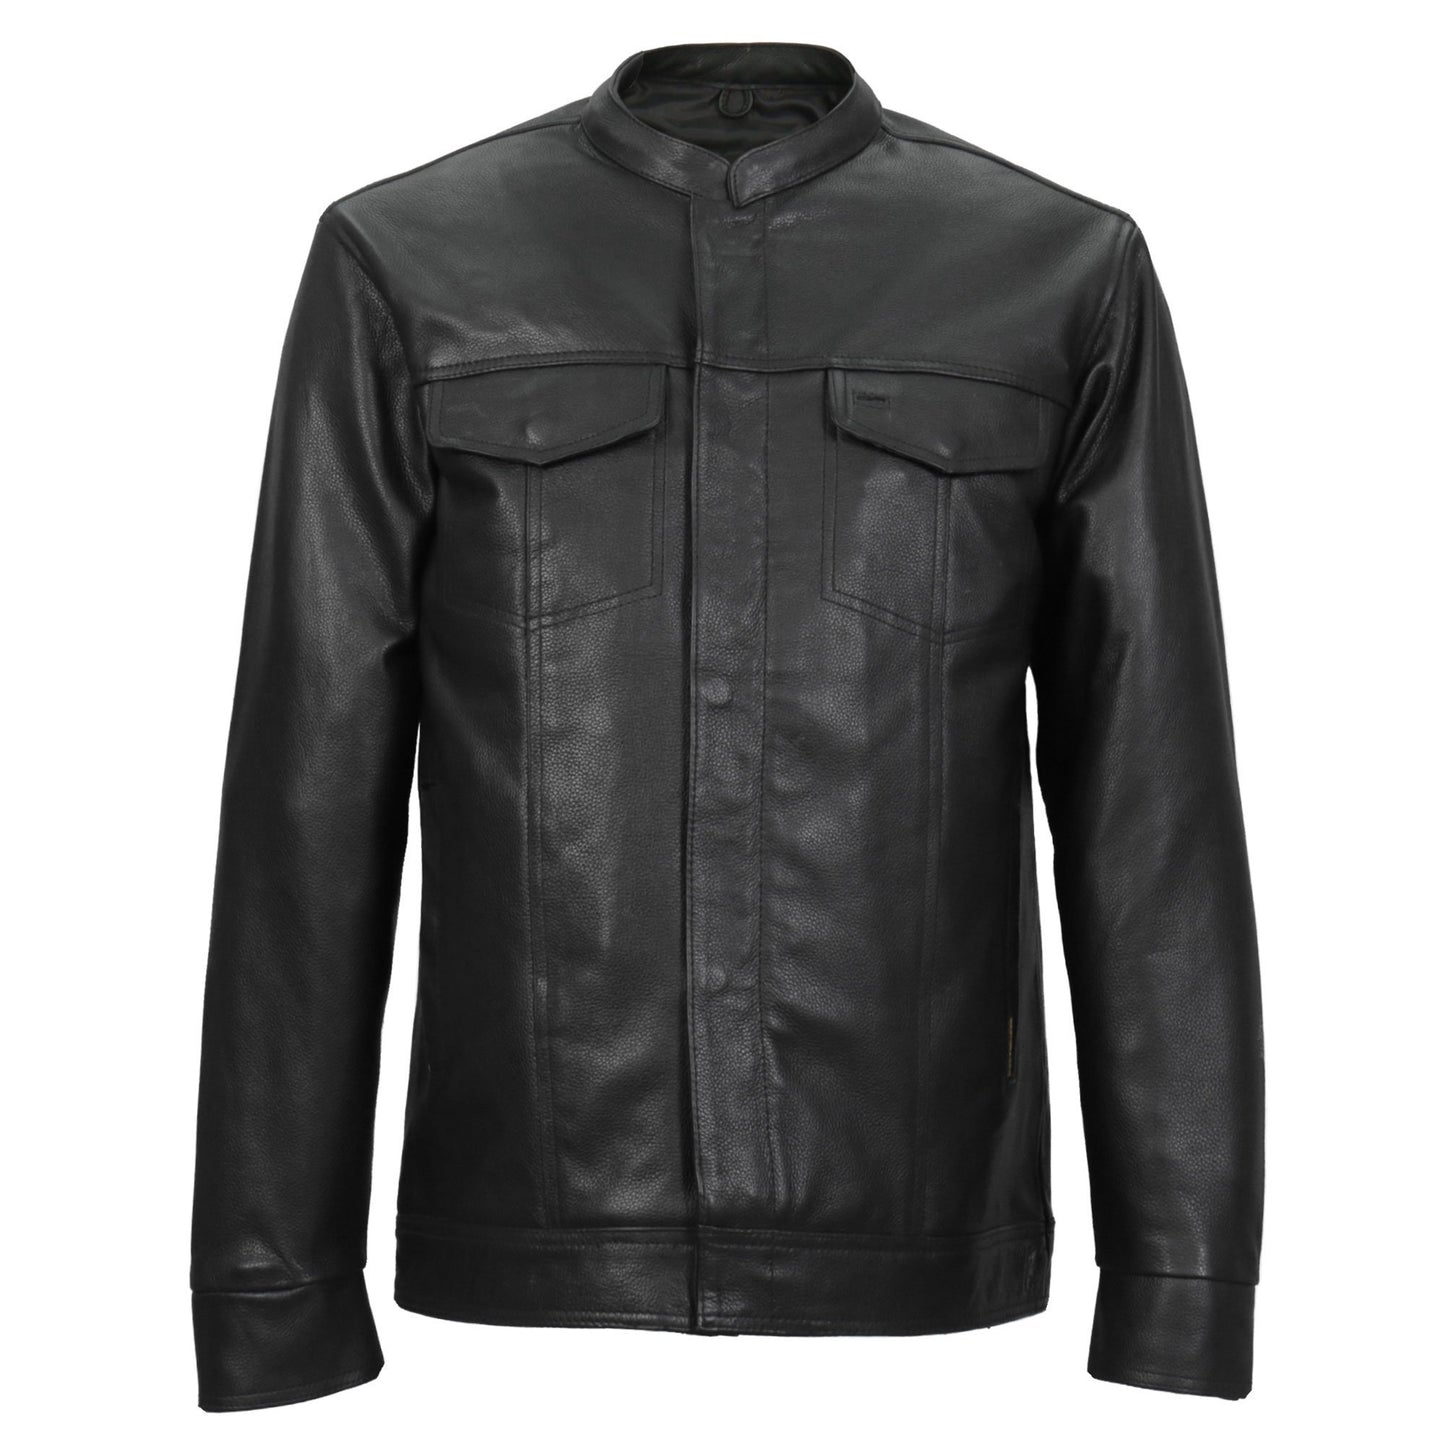 Hot Leathers LCS1005 Men's Black Leather Fashion Shirt with Hidden Snap Buttons